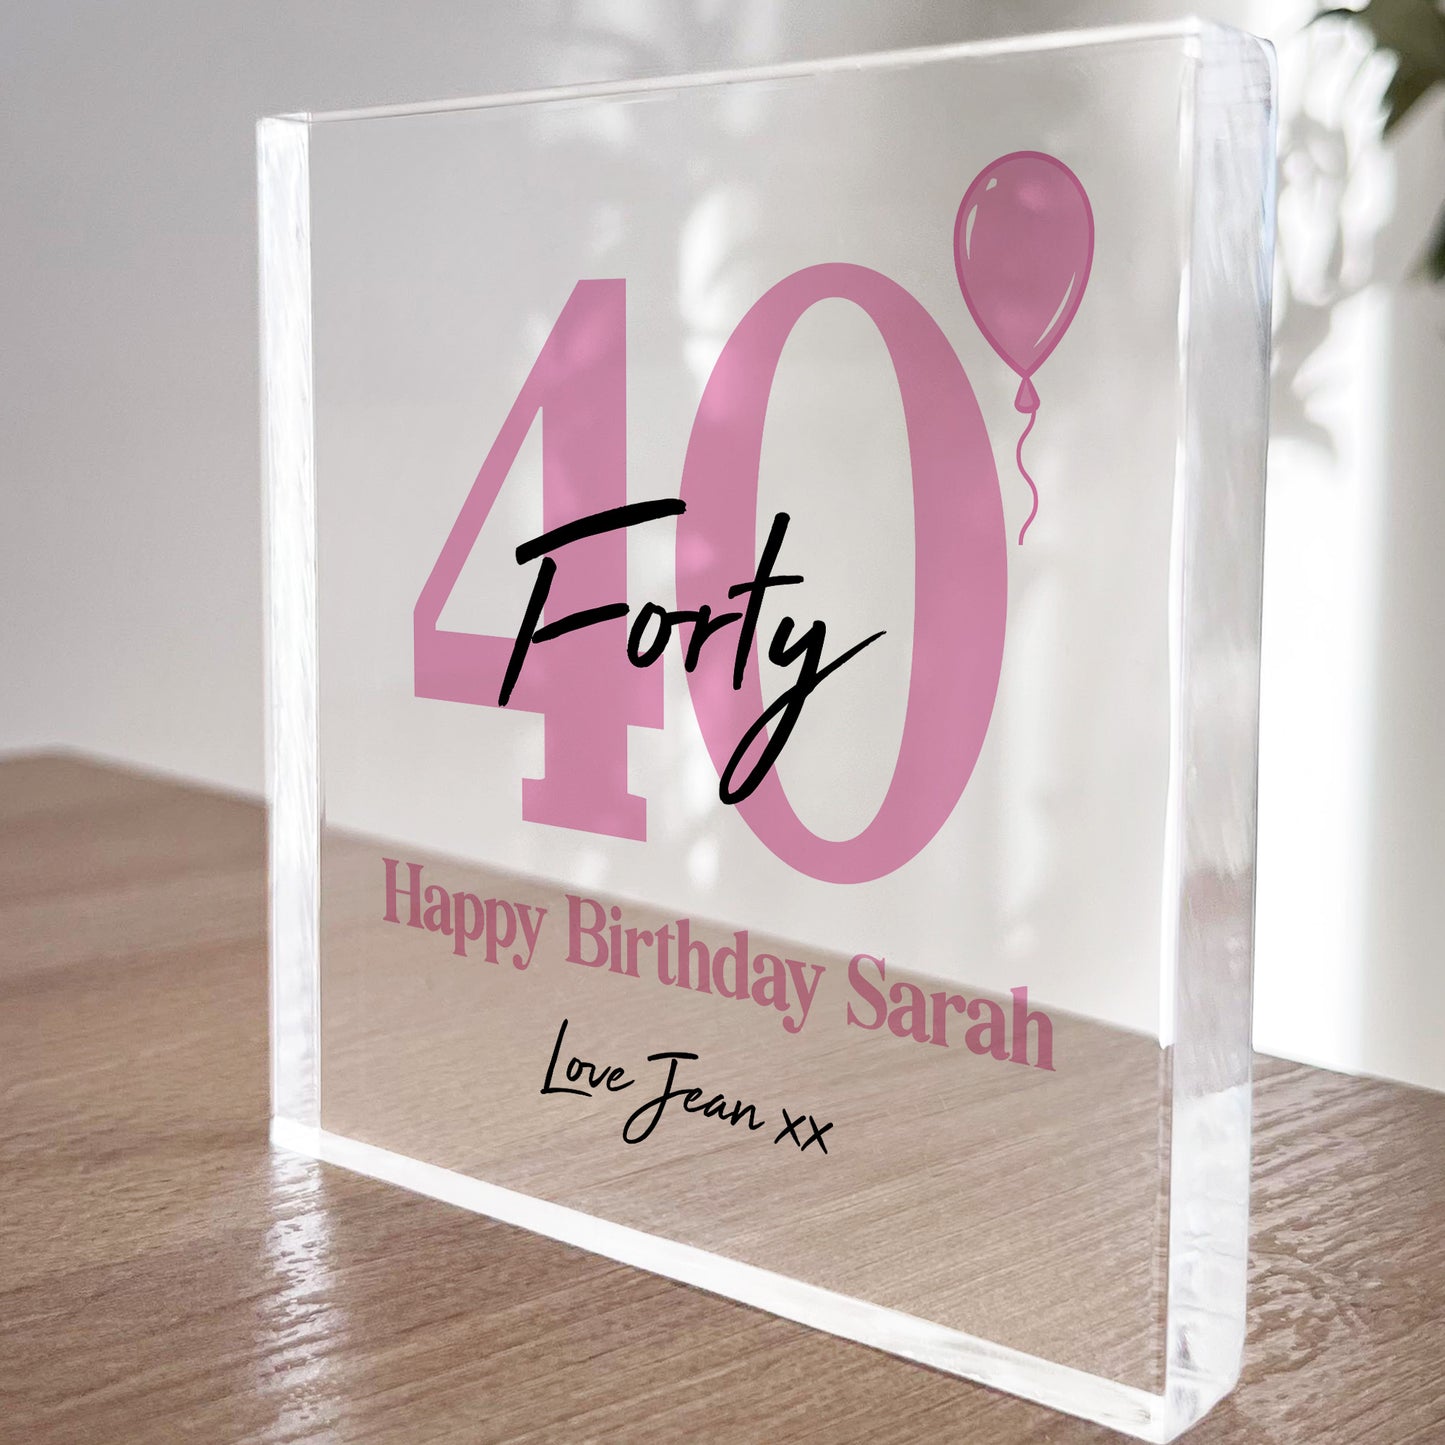 PERSONALISED 40th Birthday Gifts For Mum Sister Auntie Friend